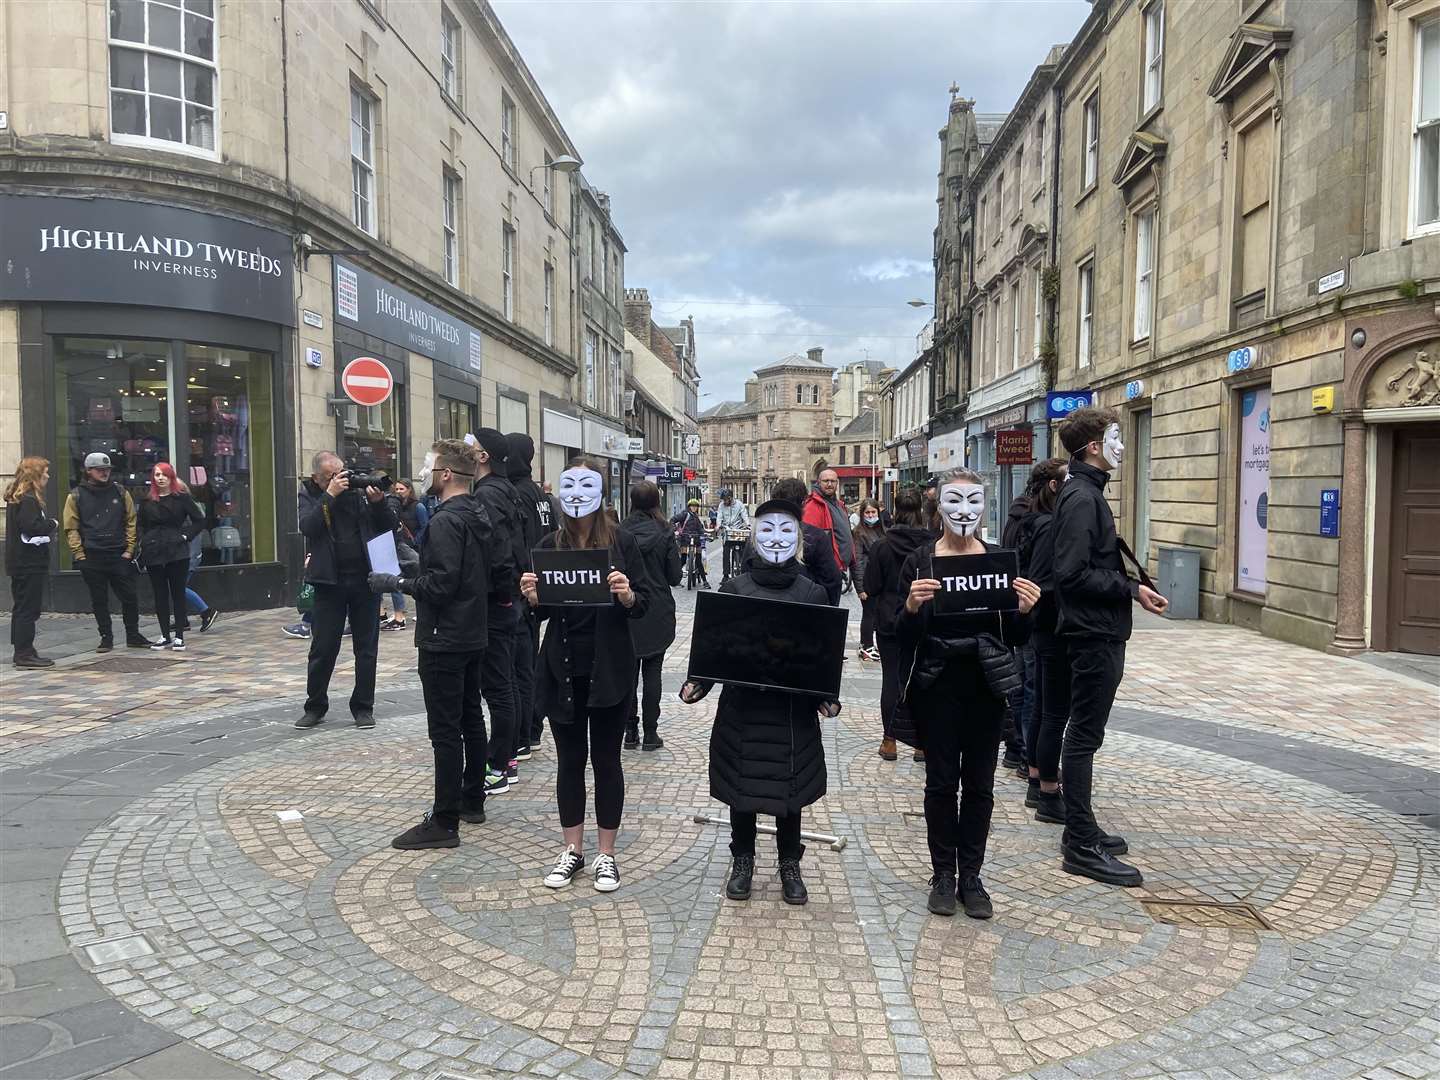 A protest was held in Inverness for animal rights.